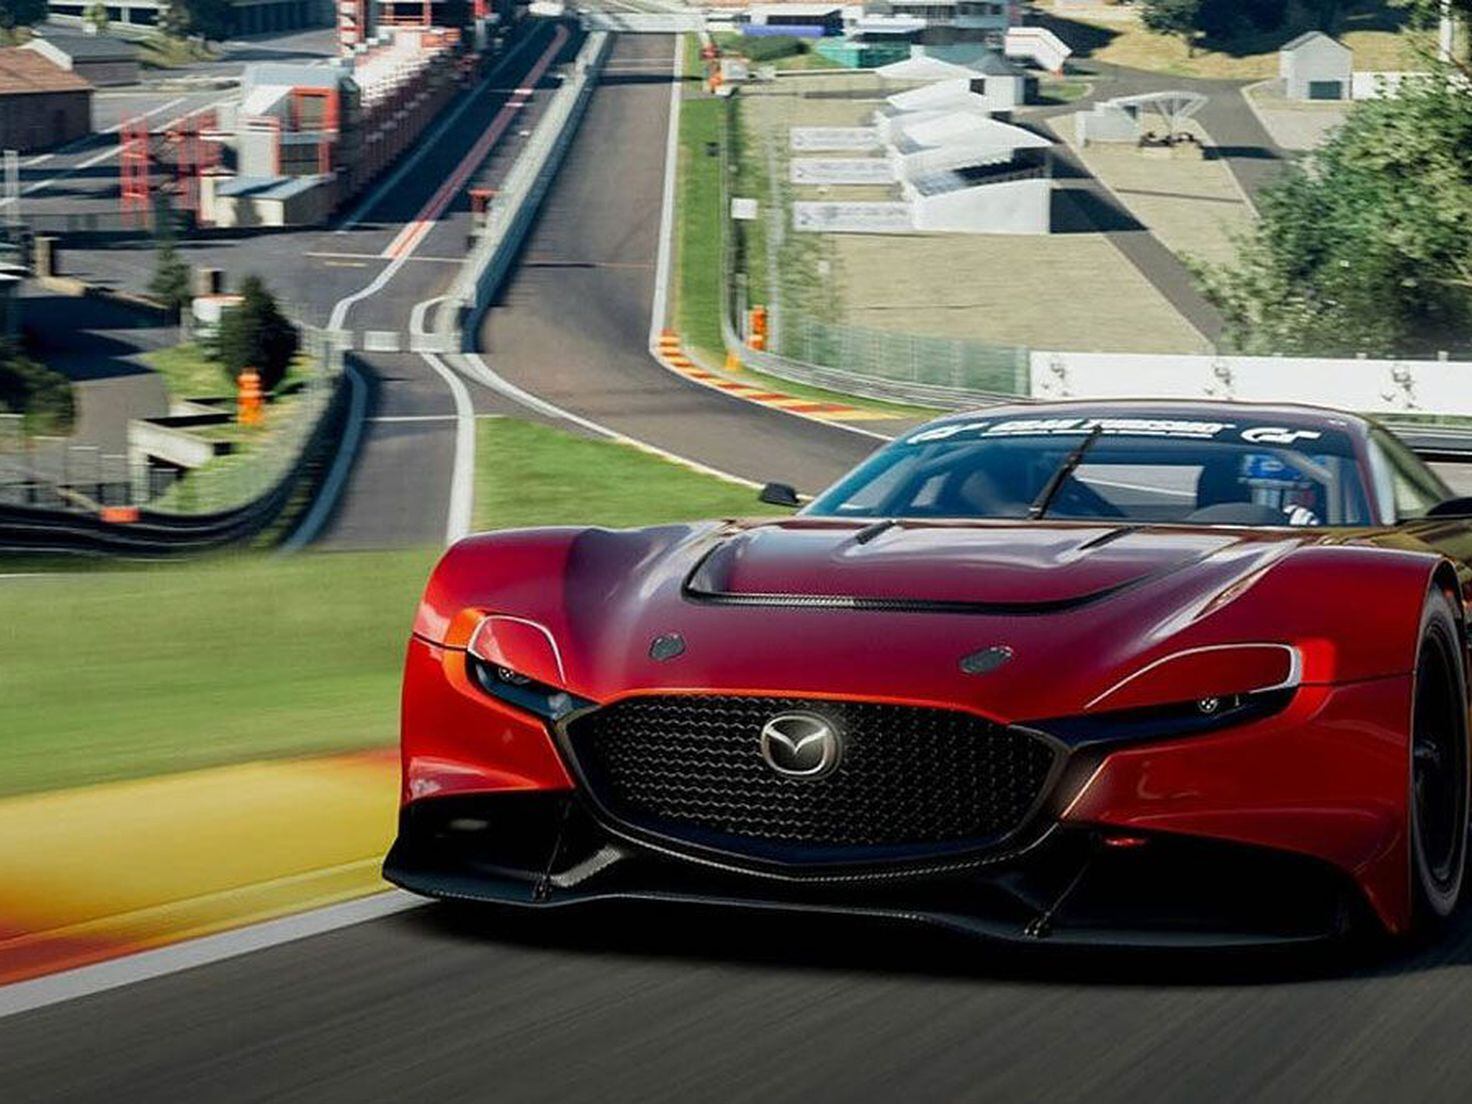 Gran Turismo 7 preview: The PS5 takes you to a car culture